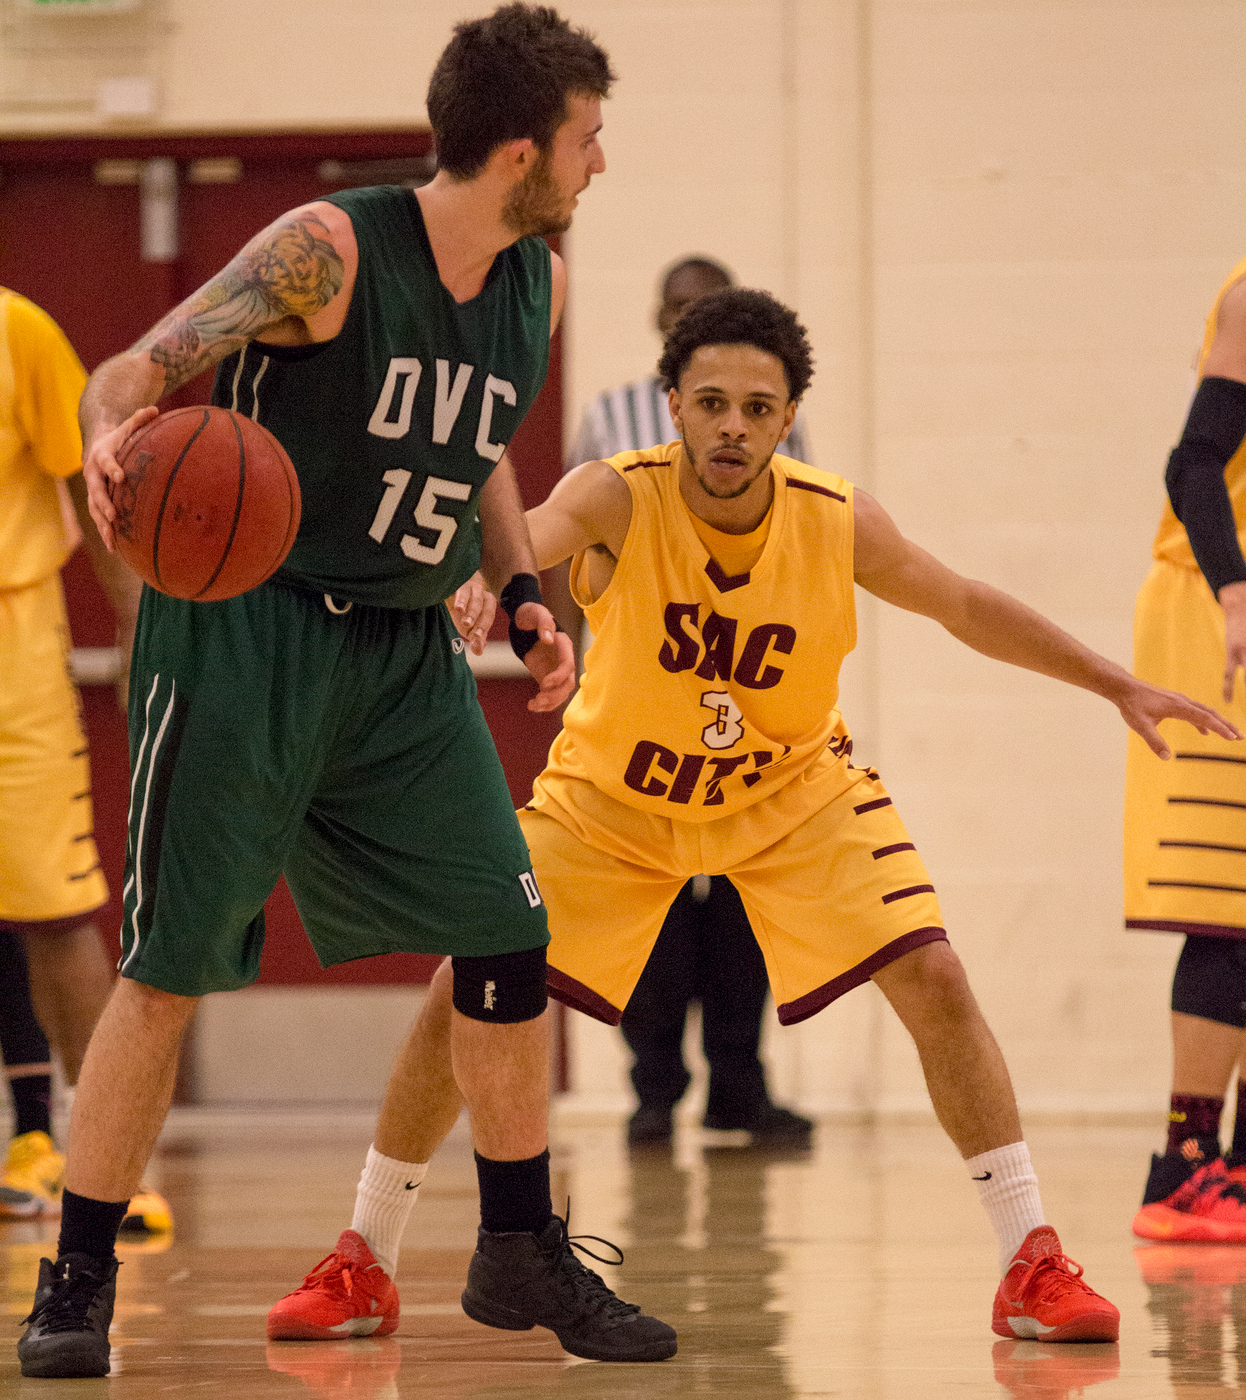 City College guard Devin Joseph stares down the ball while playing defense in the game against Diablo Valley College Feb. 11, 2016. Photo Courtesy: Kris Hooks | Khooks3825@gmail.com